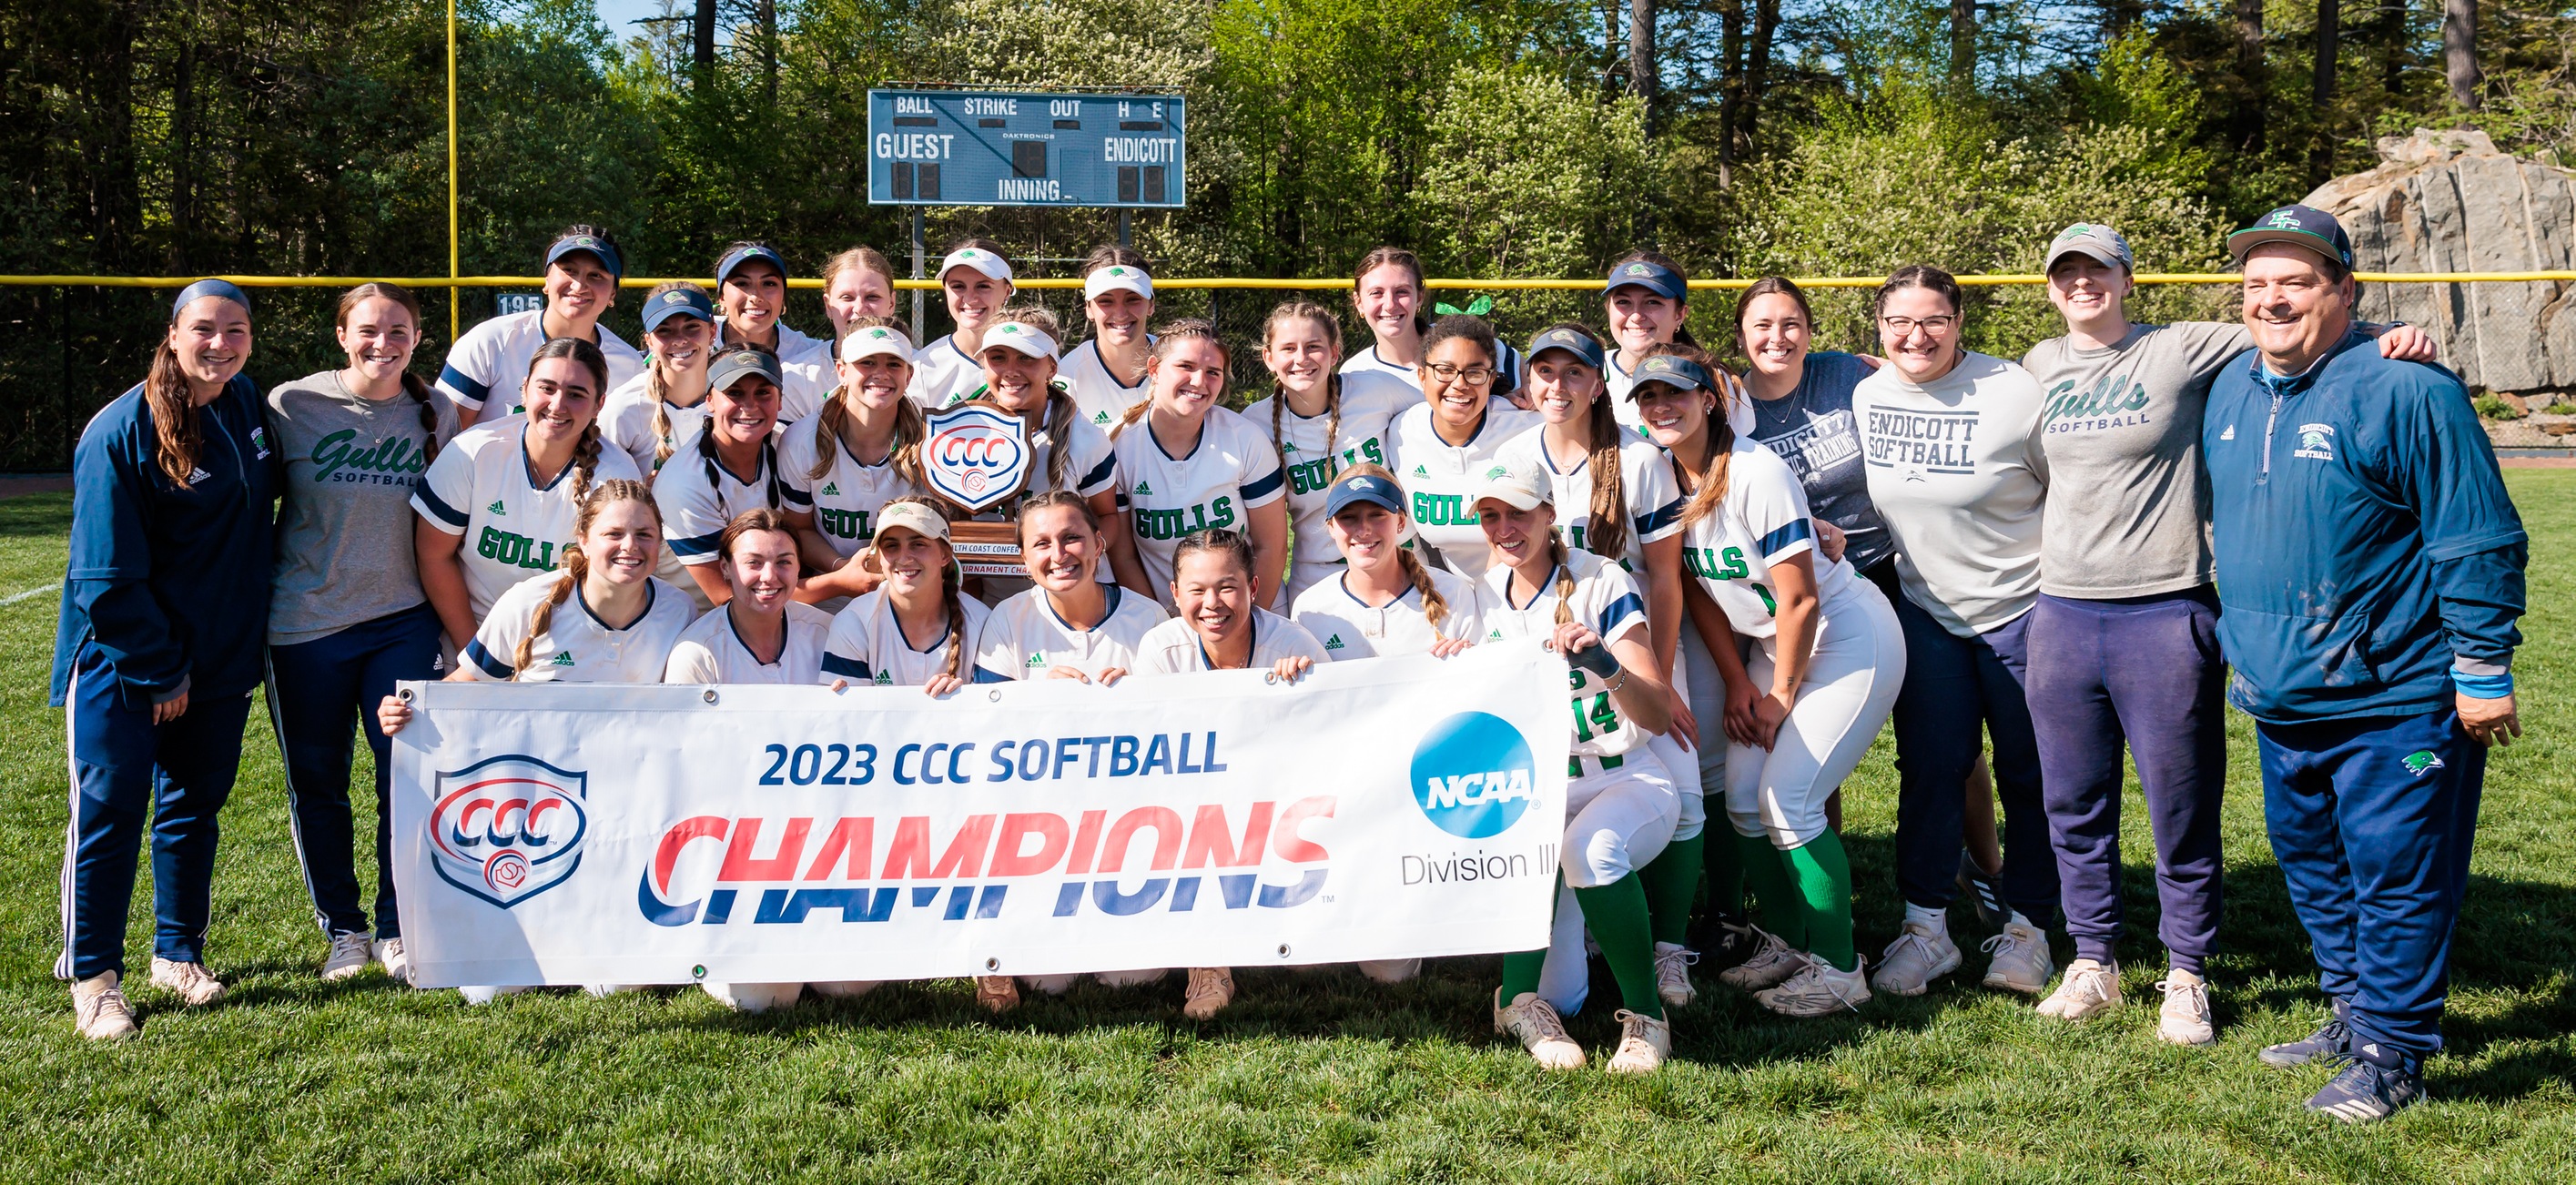 CCC CHAMPIONS! Gulls Sweep Western New England To Win Fourth Straight Title